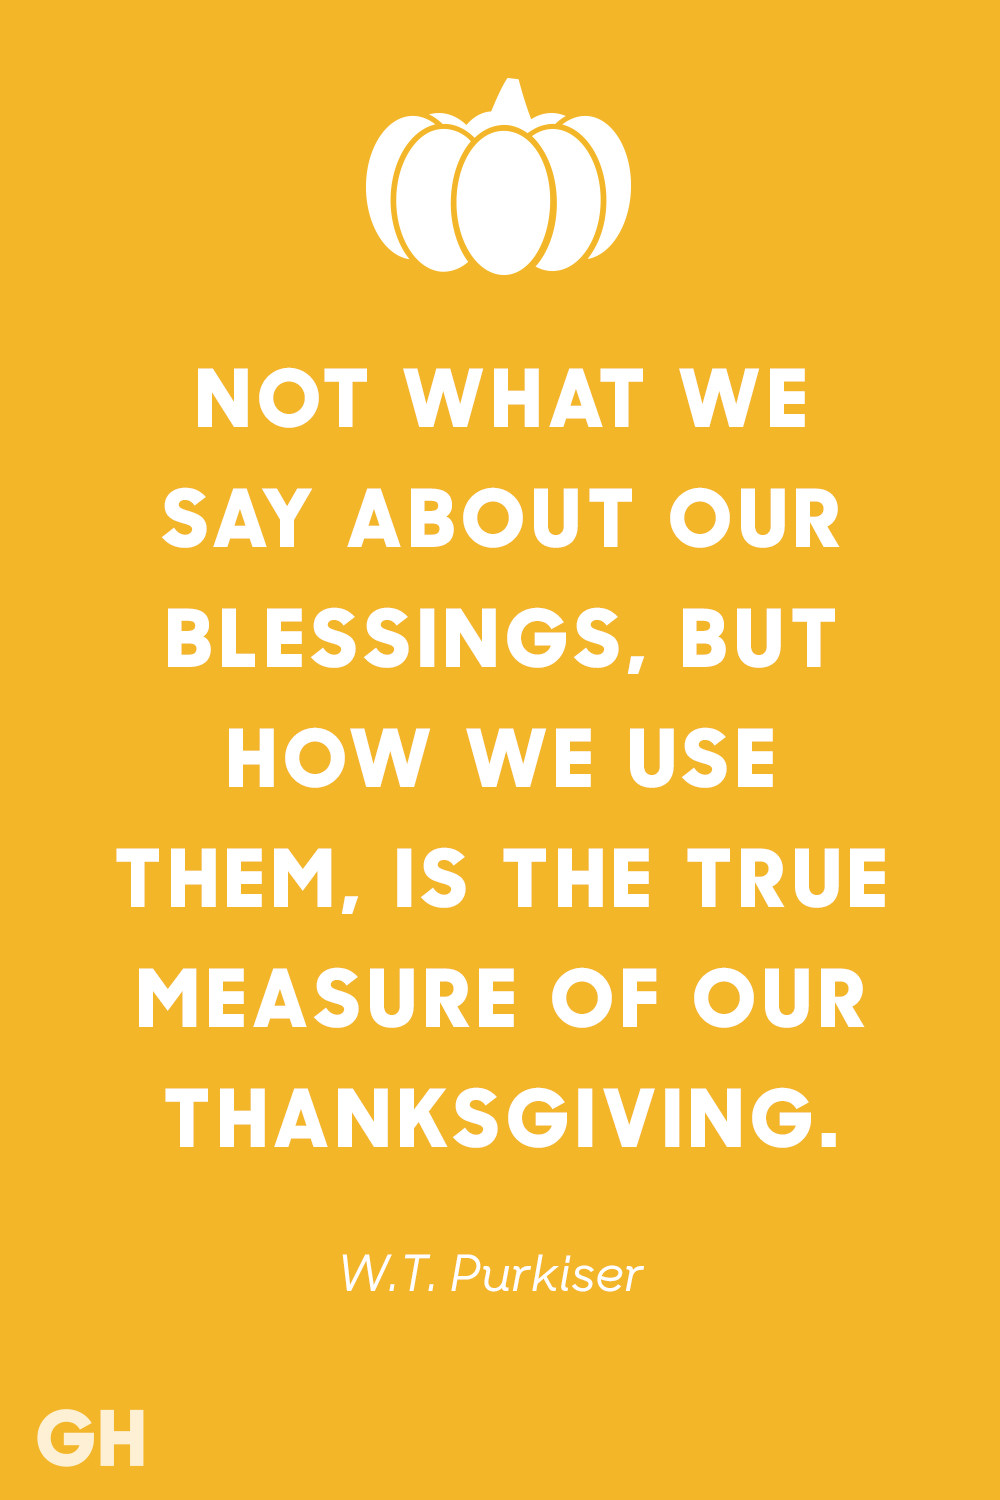 Thanksgiving Turkey Quotes
 15 Best Thanksgiving Quotes Inspirational and Funny